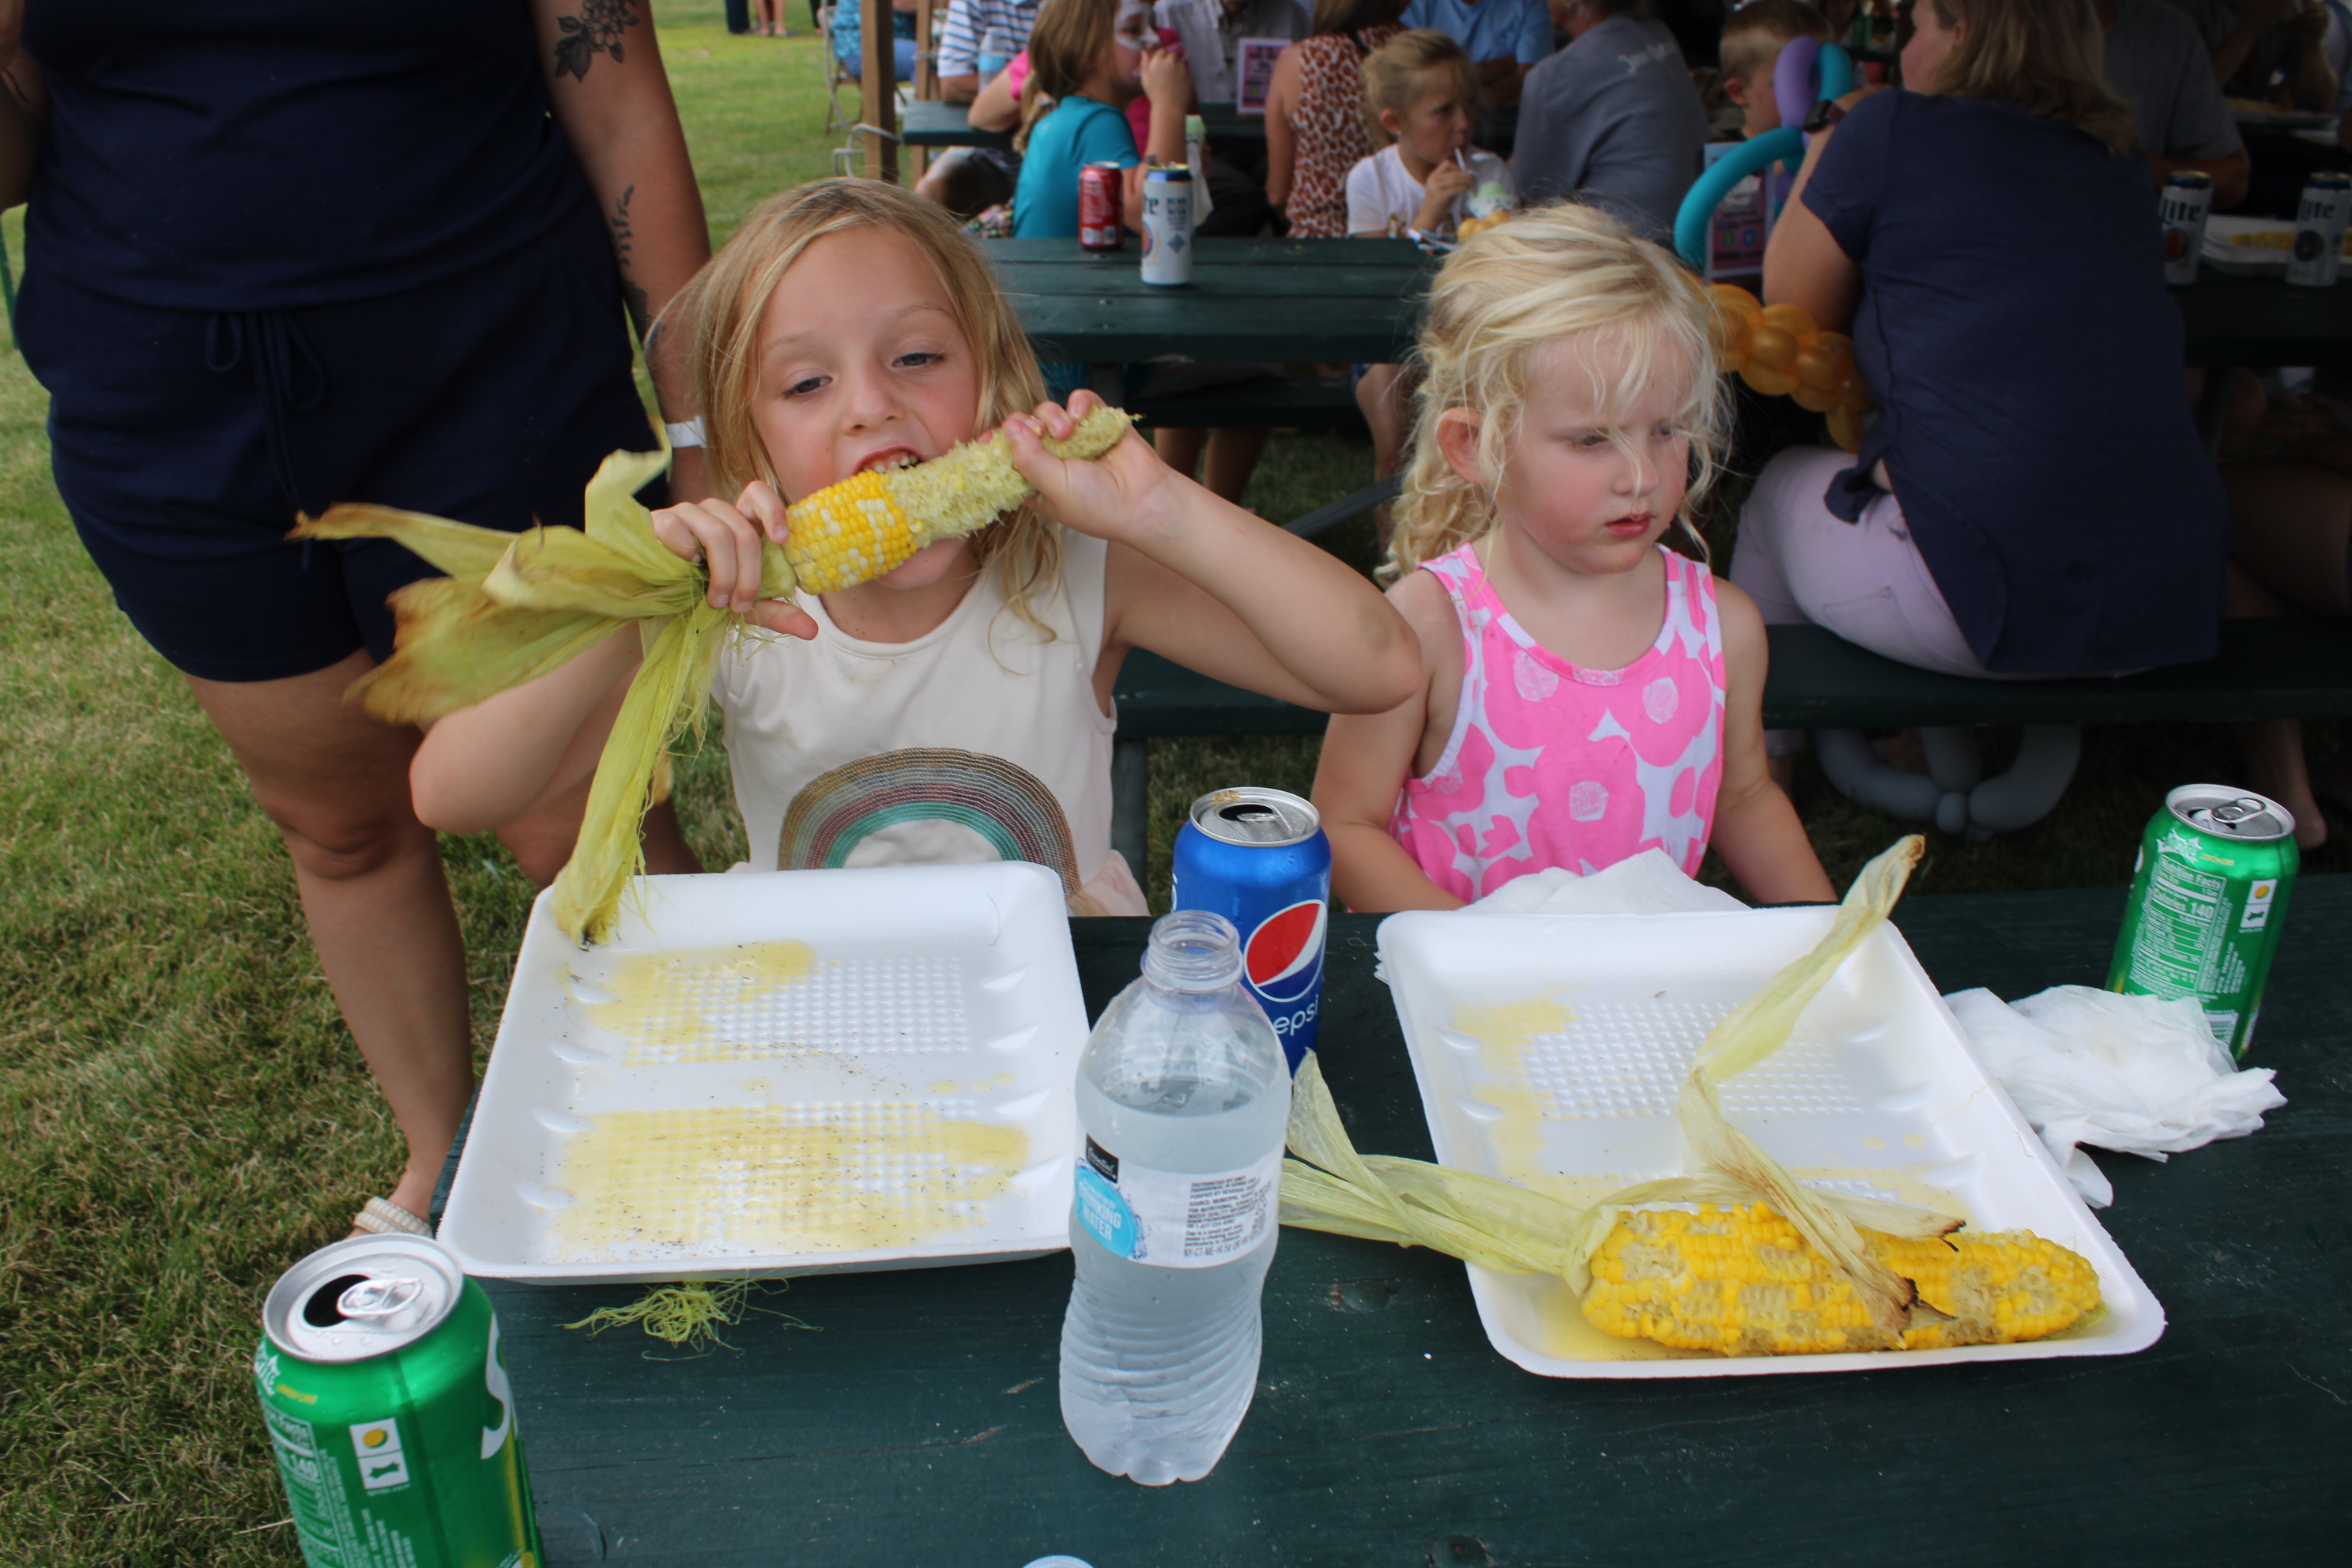 Two young children enjoy corn on the cob at the annual Rotary Corn and Brat Festival Photo by Penny Gruetzmache